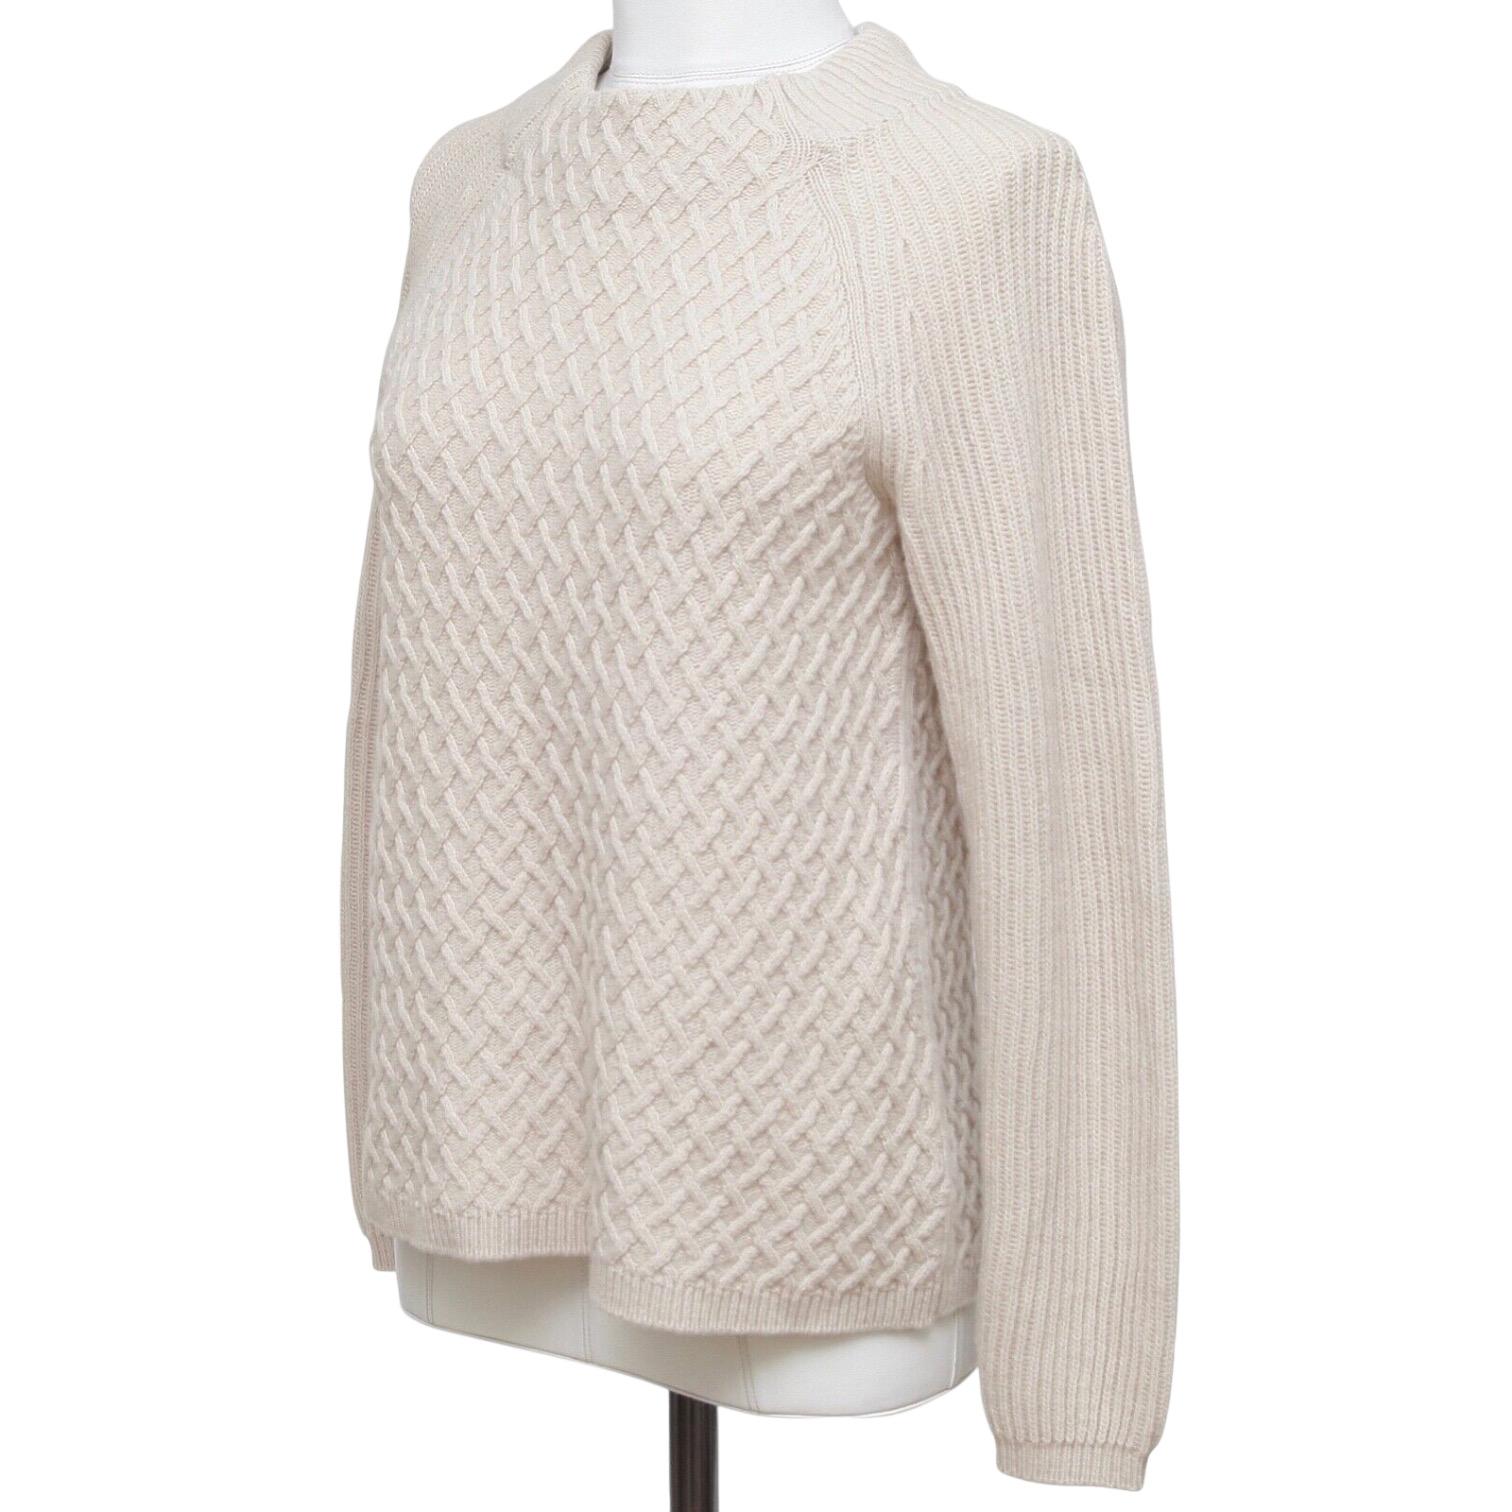 MAX MARA Knit Sweater Beige Long Sleeve Moc Turtleneck Pullover Sz S In Excellent Condition For Sale In Hollywood, FL